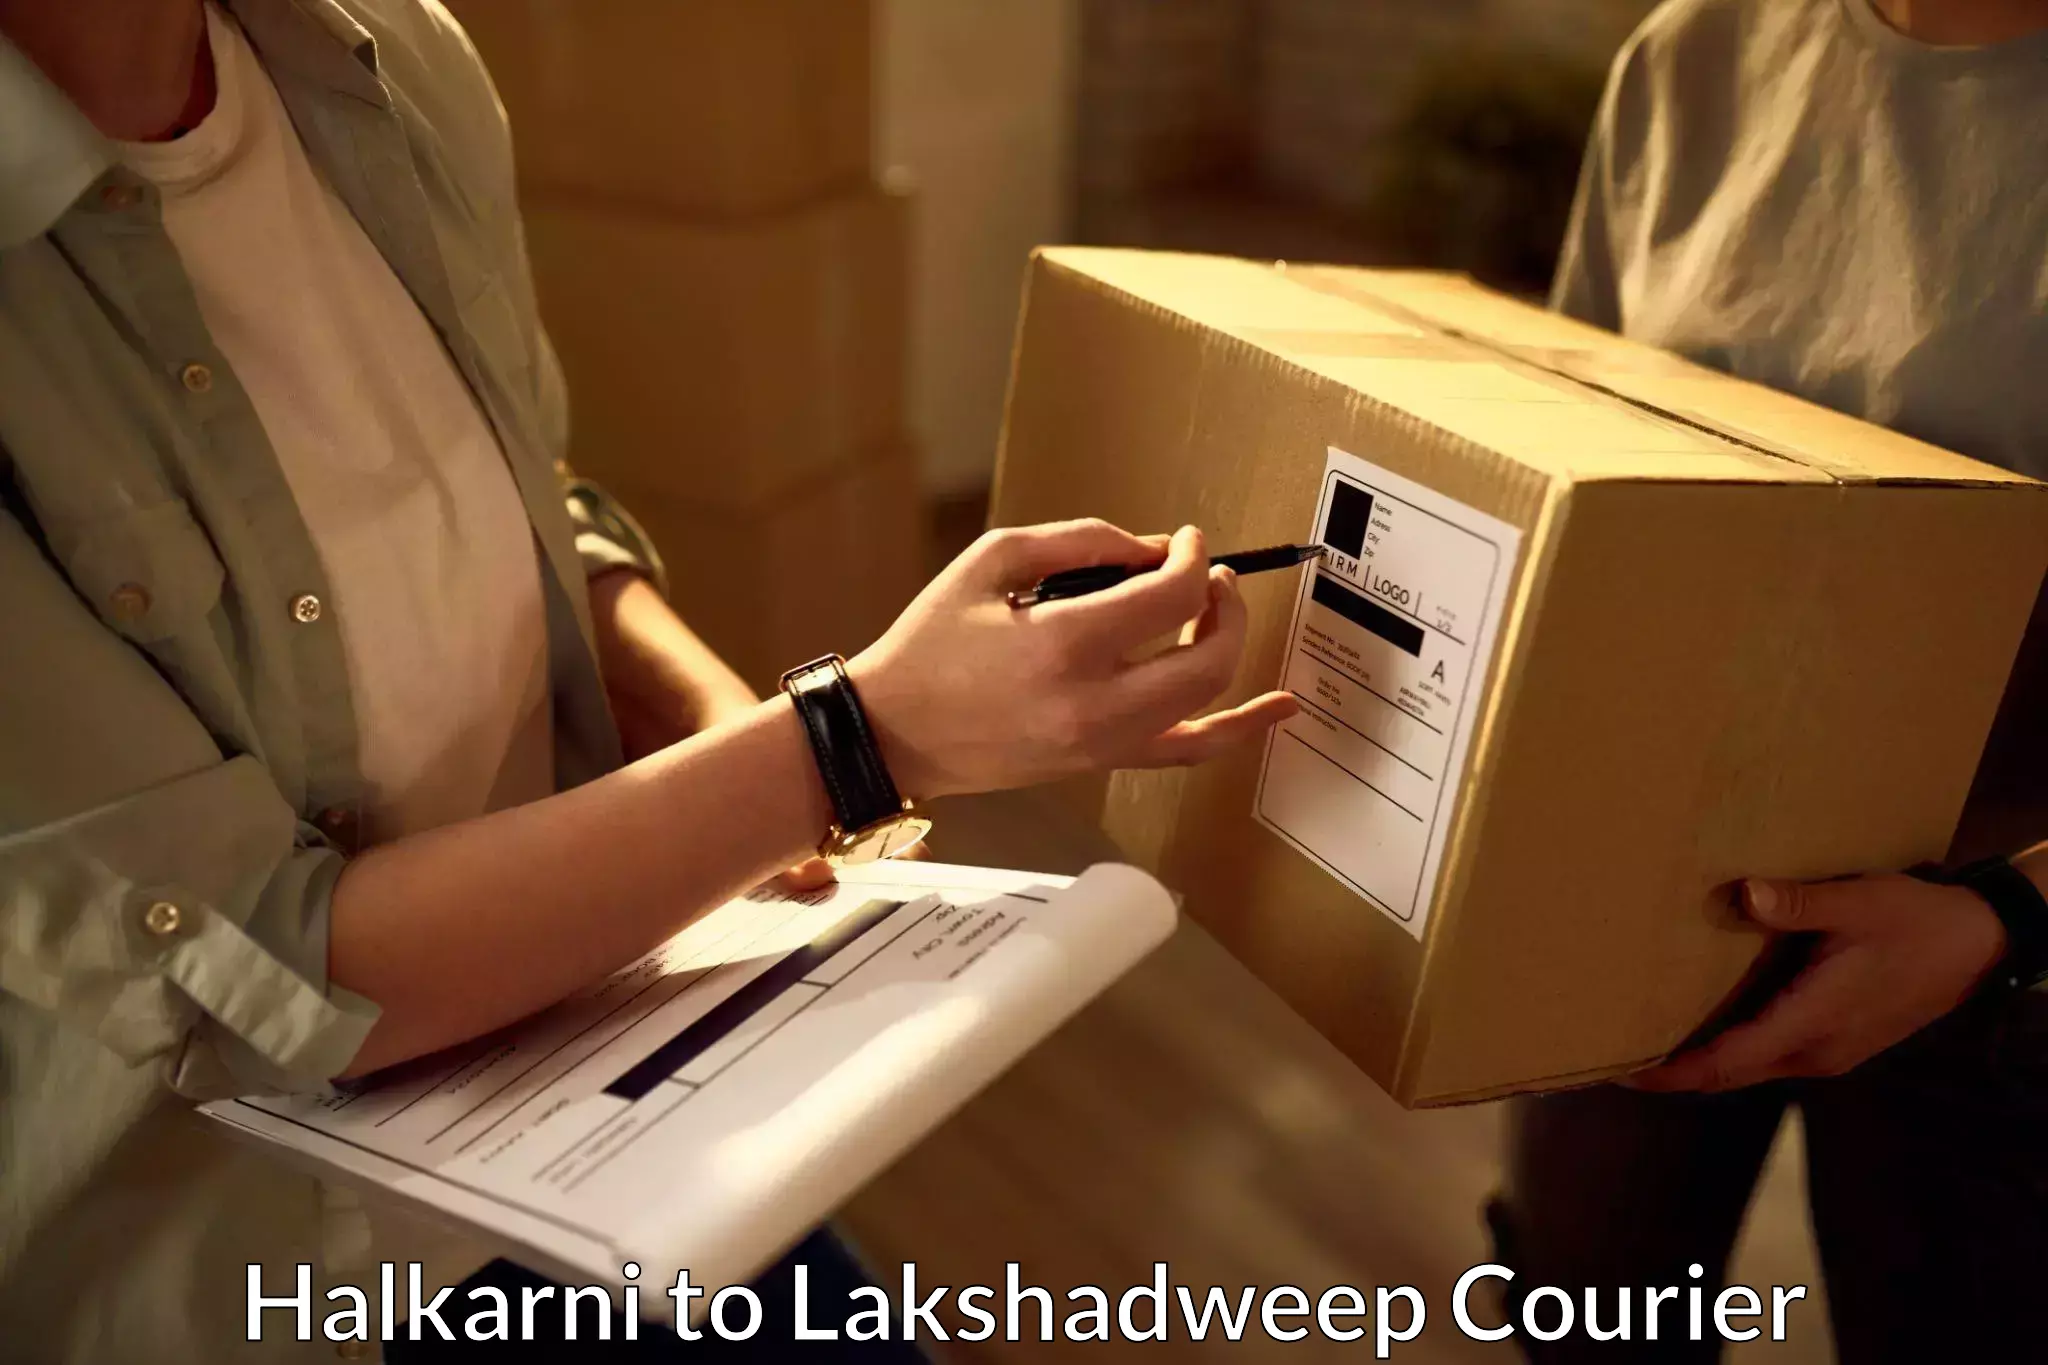 Efficient package consolidation in Halkarni to Lakshadweep